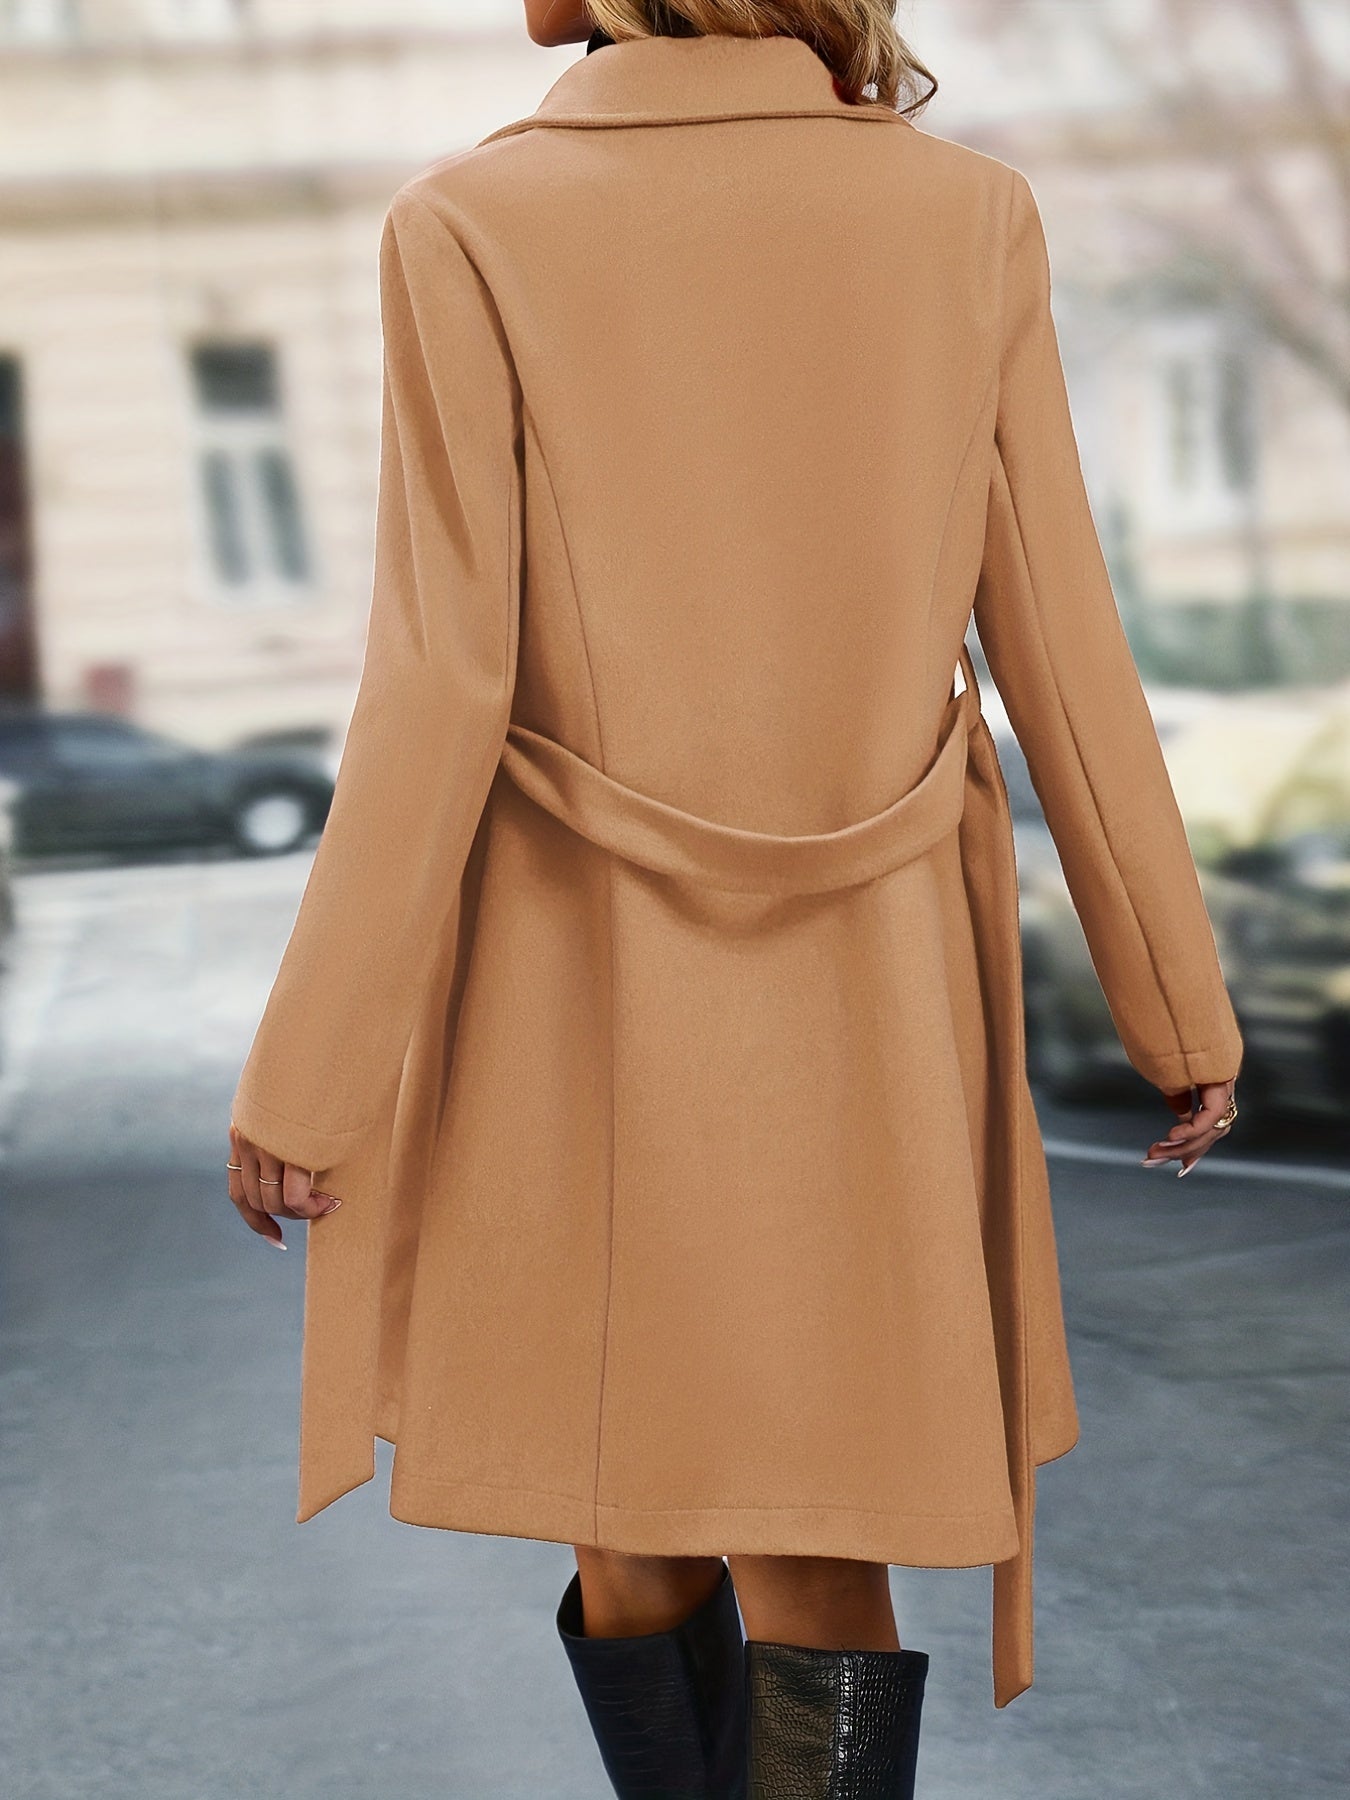 Double Breasted Trench Coat, Elegant Lapel Long Sleeve Outerwear, Women's Clothing